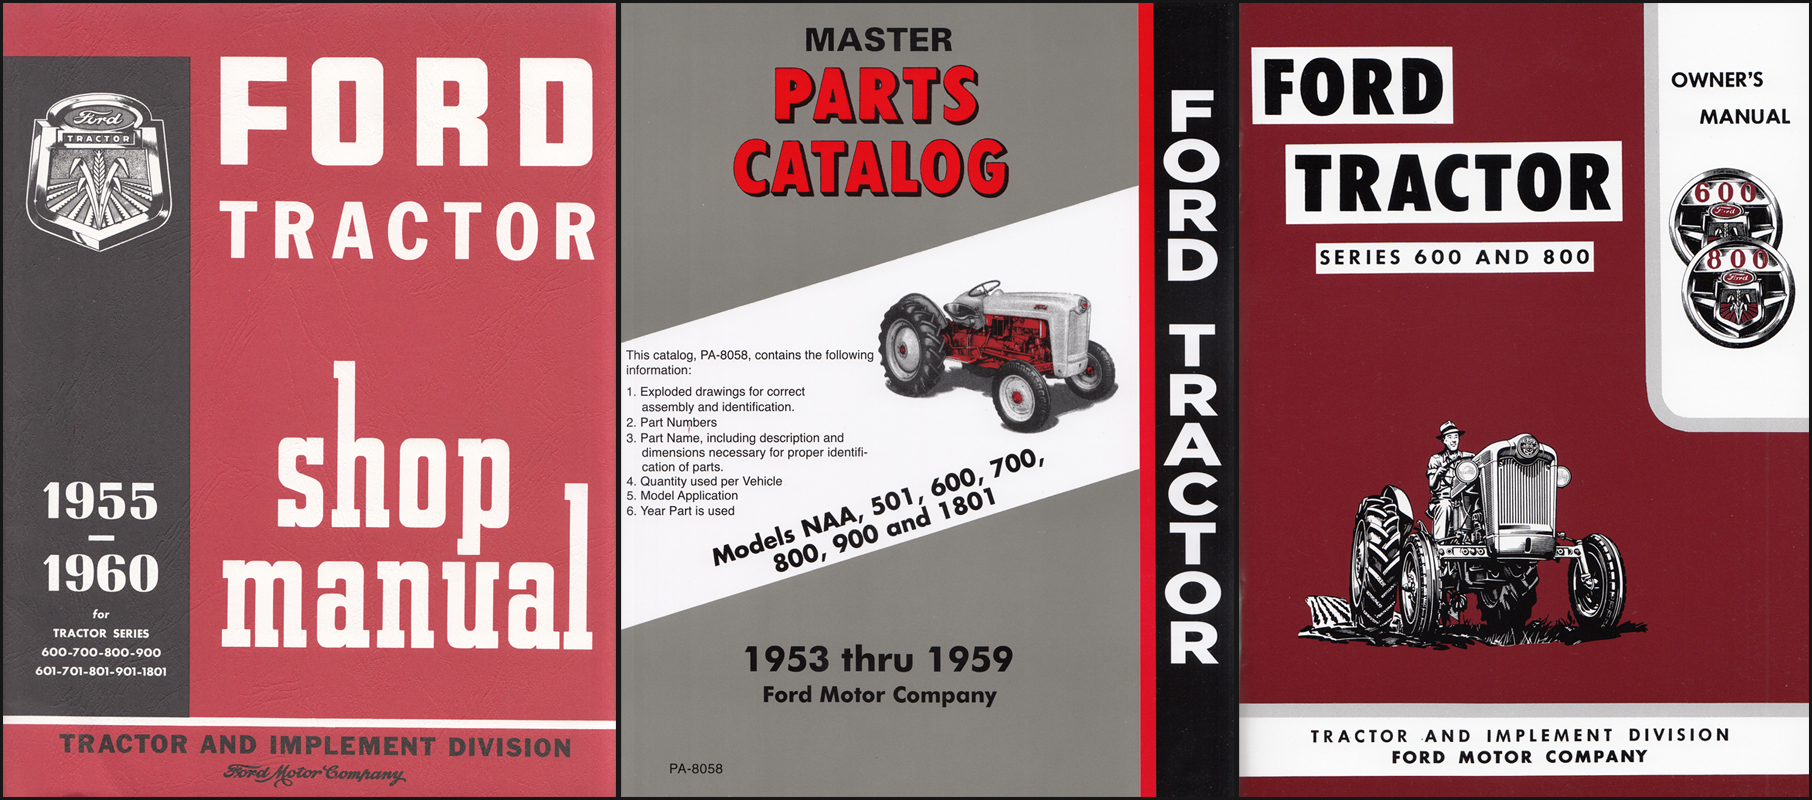 ford 600 tractor manual